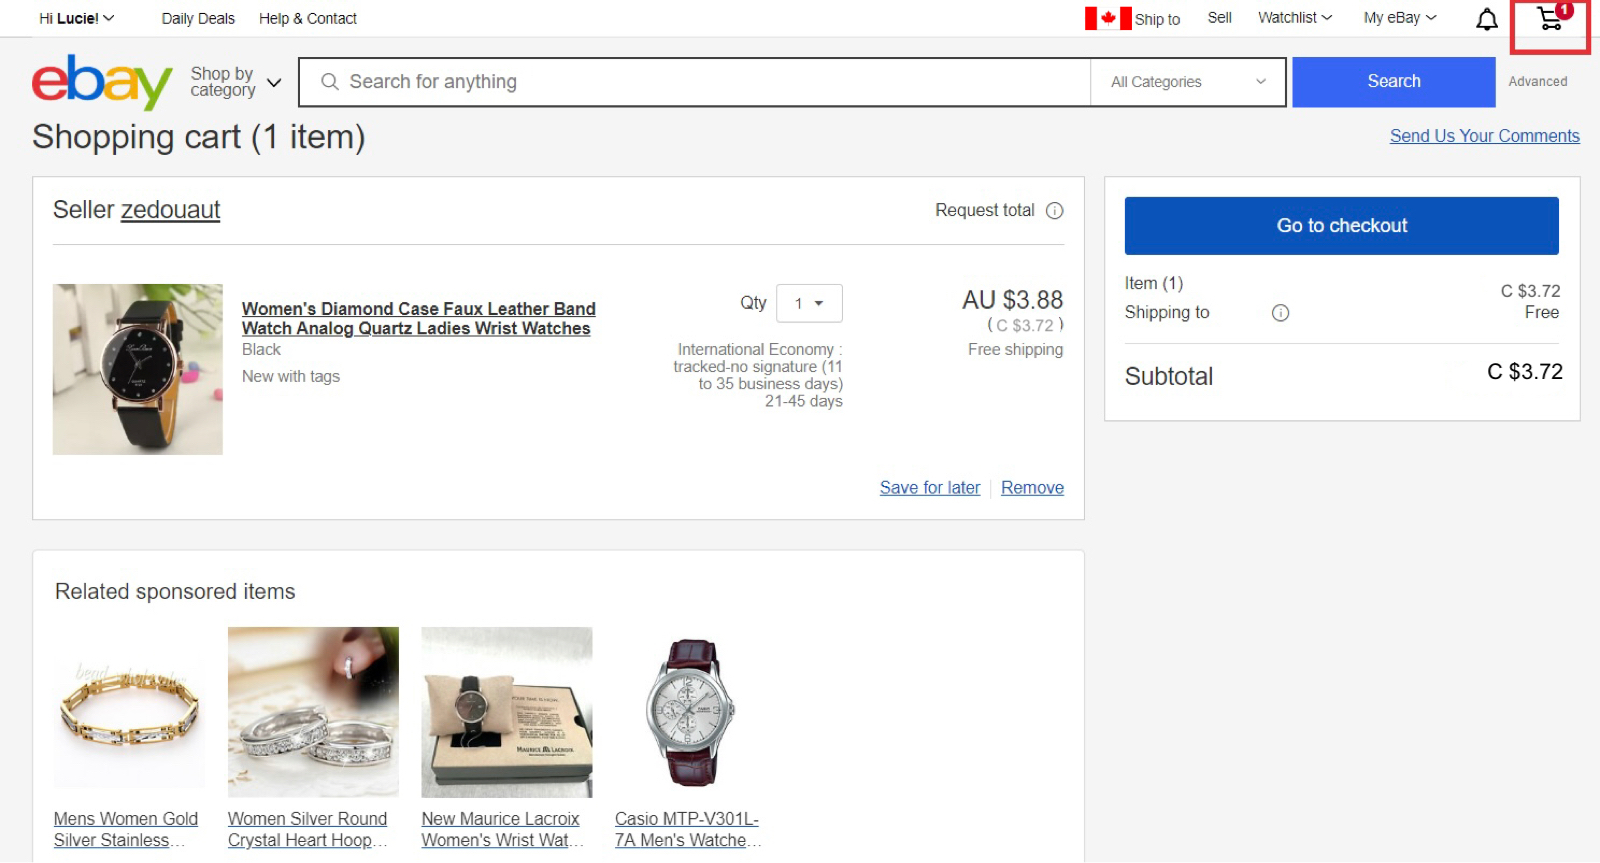 A Step-by-Step Guide: How to buy on eBay 2023